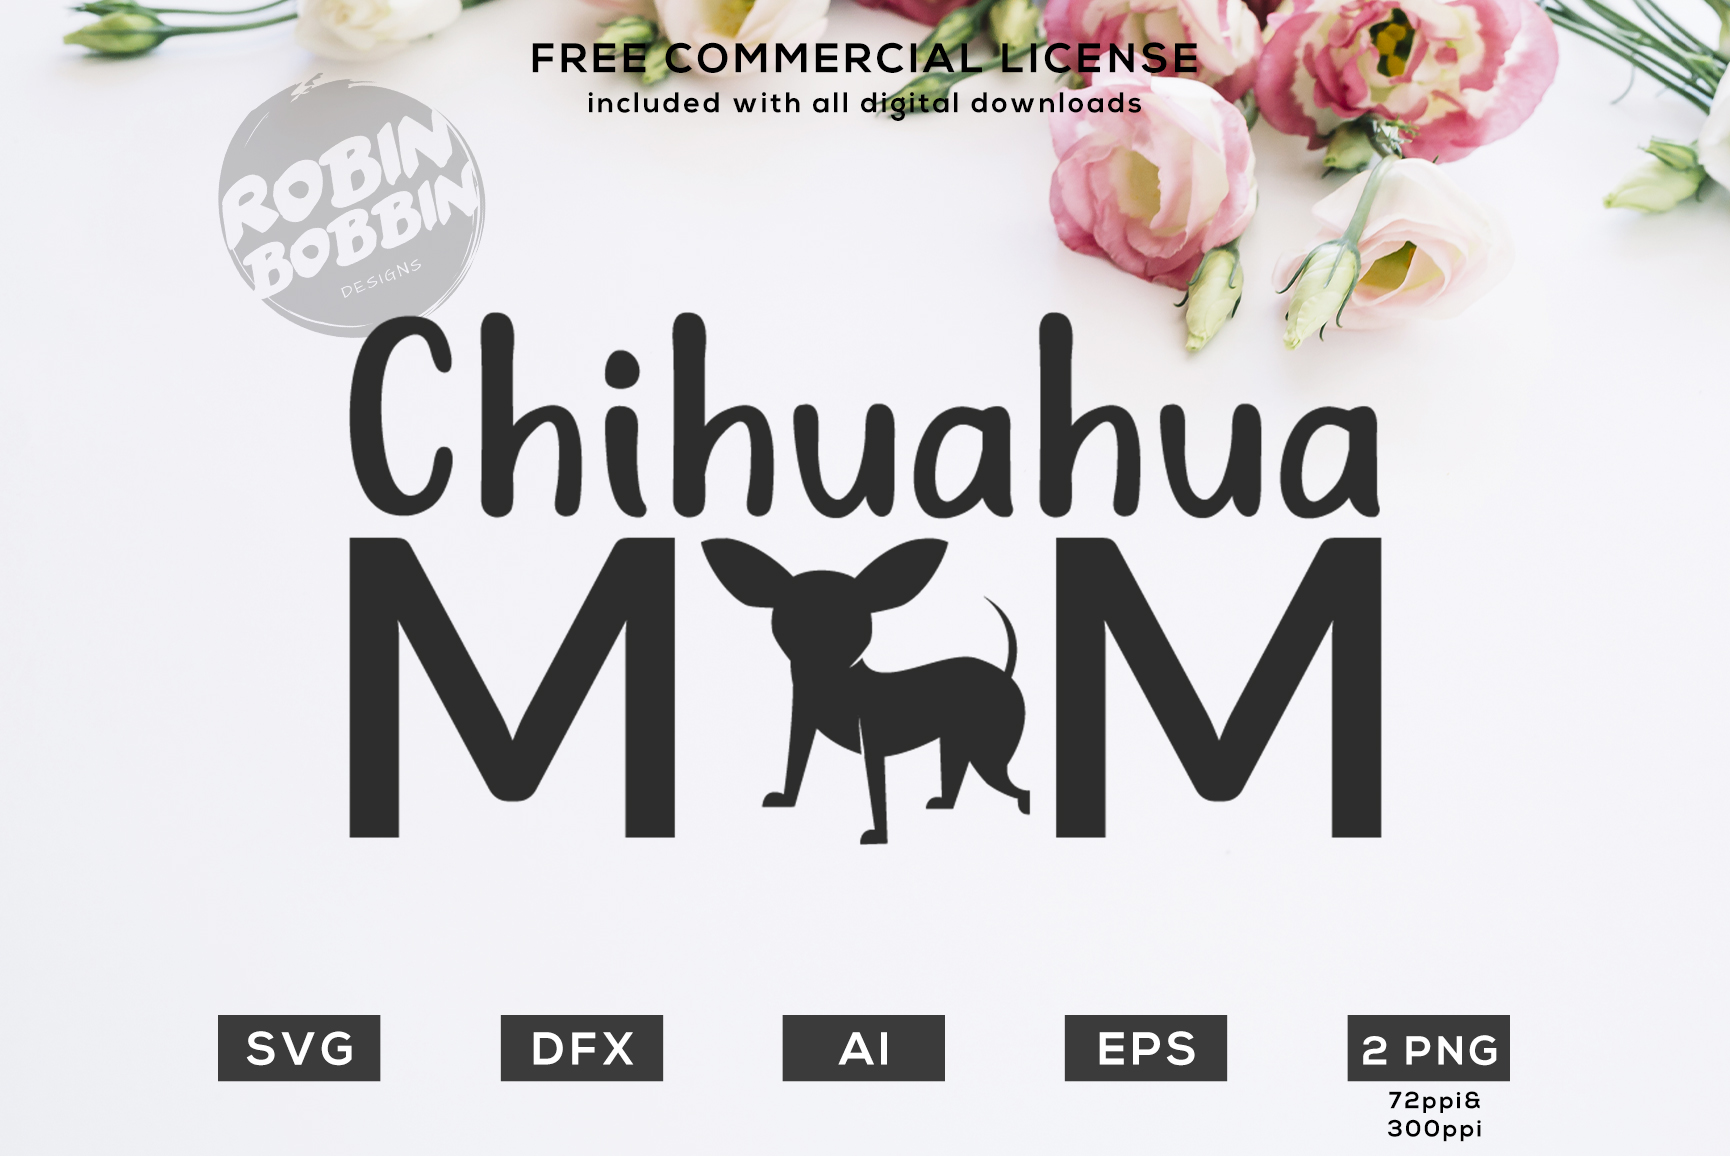 Download Chihuahua Mom - Design for T-Shirt, Hoodies, Mugs and more